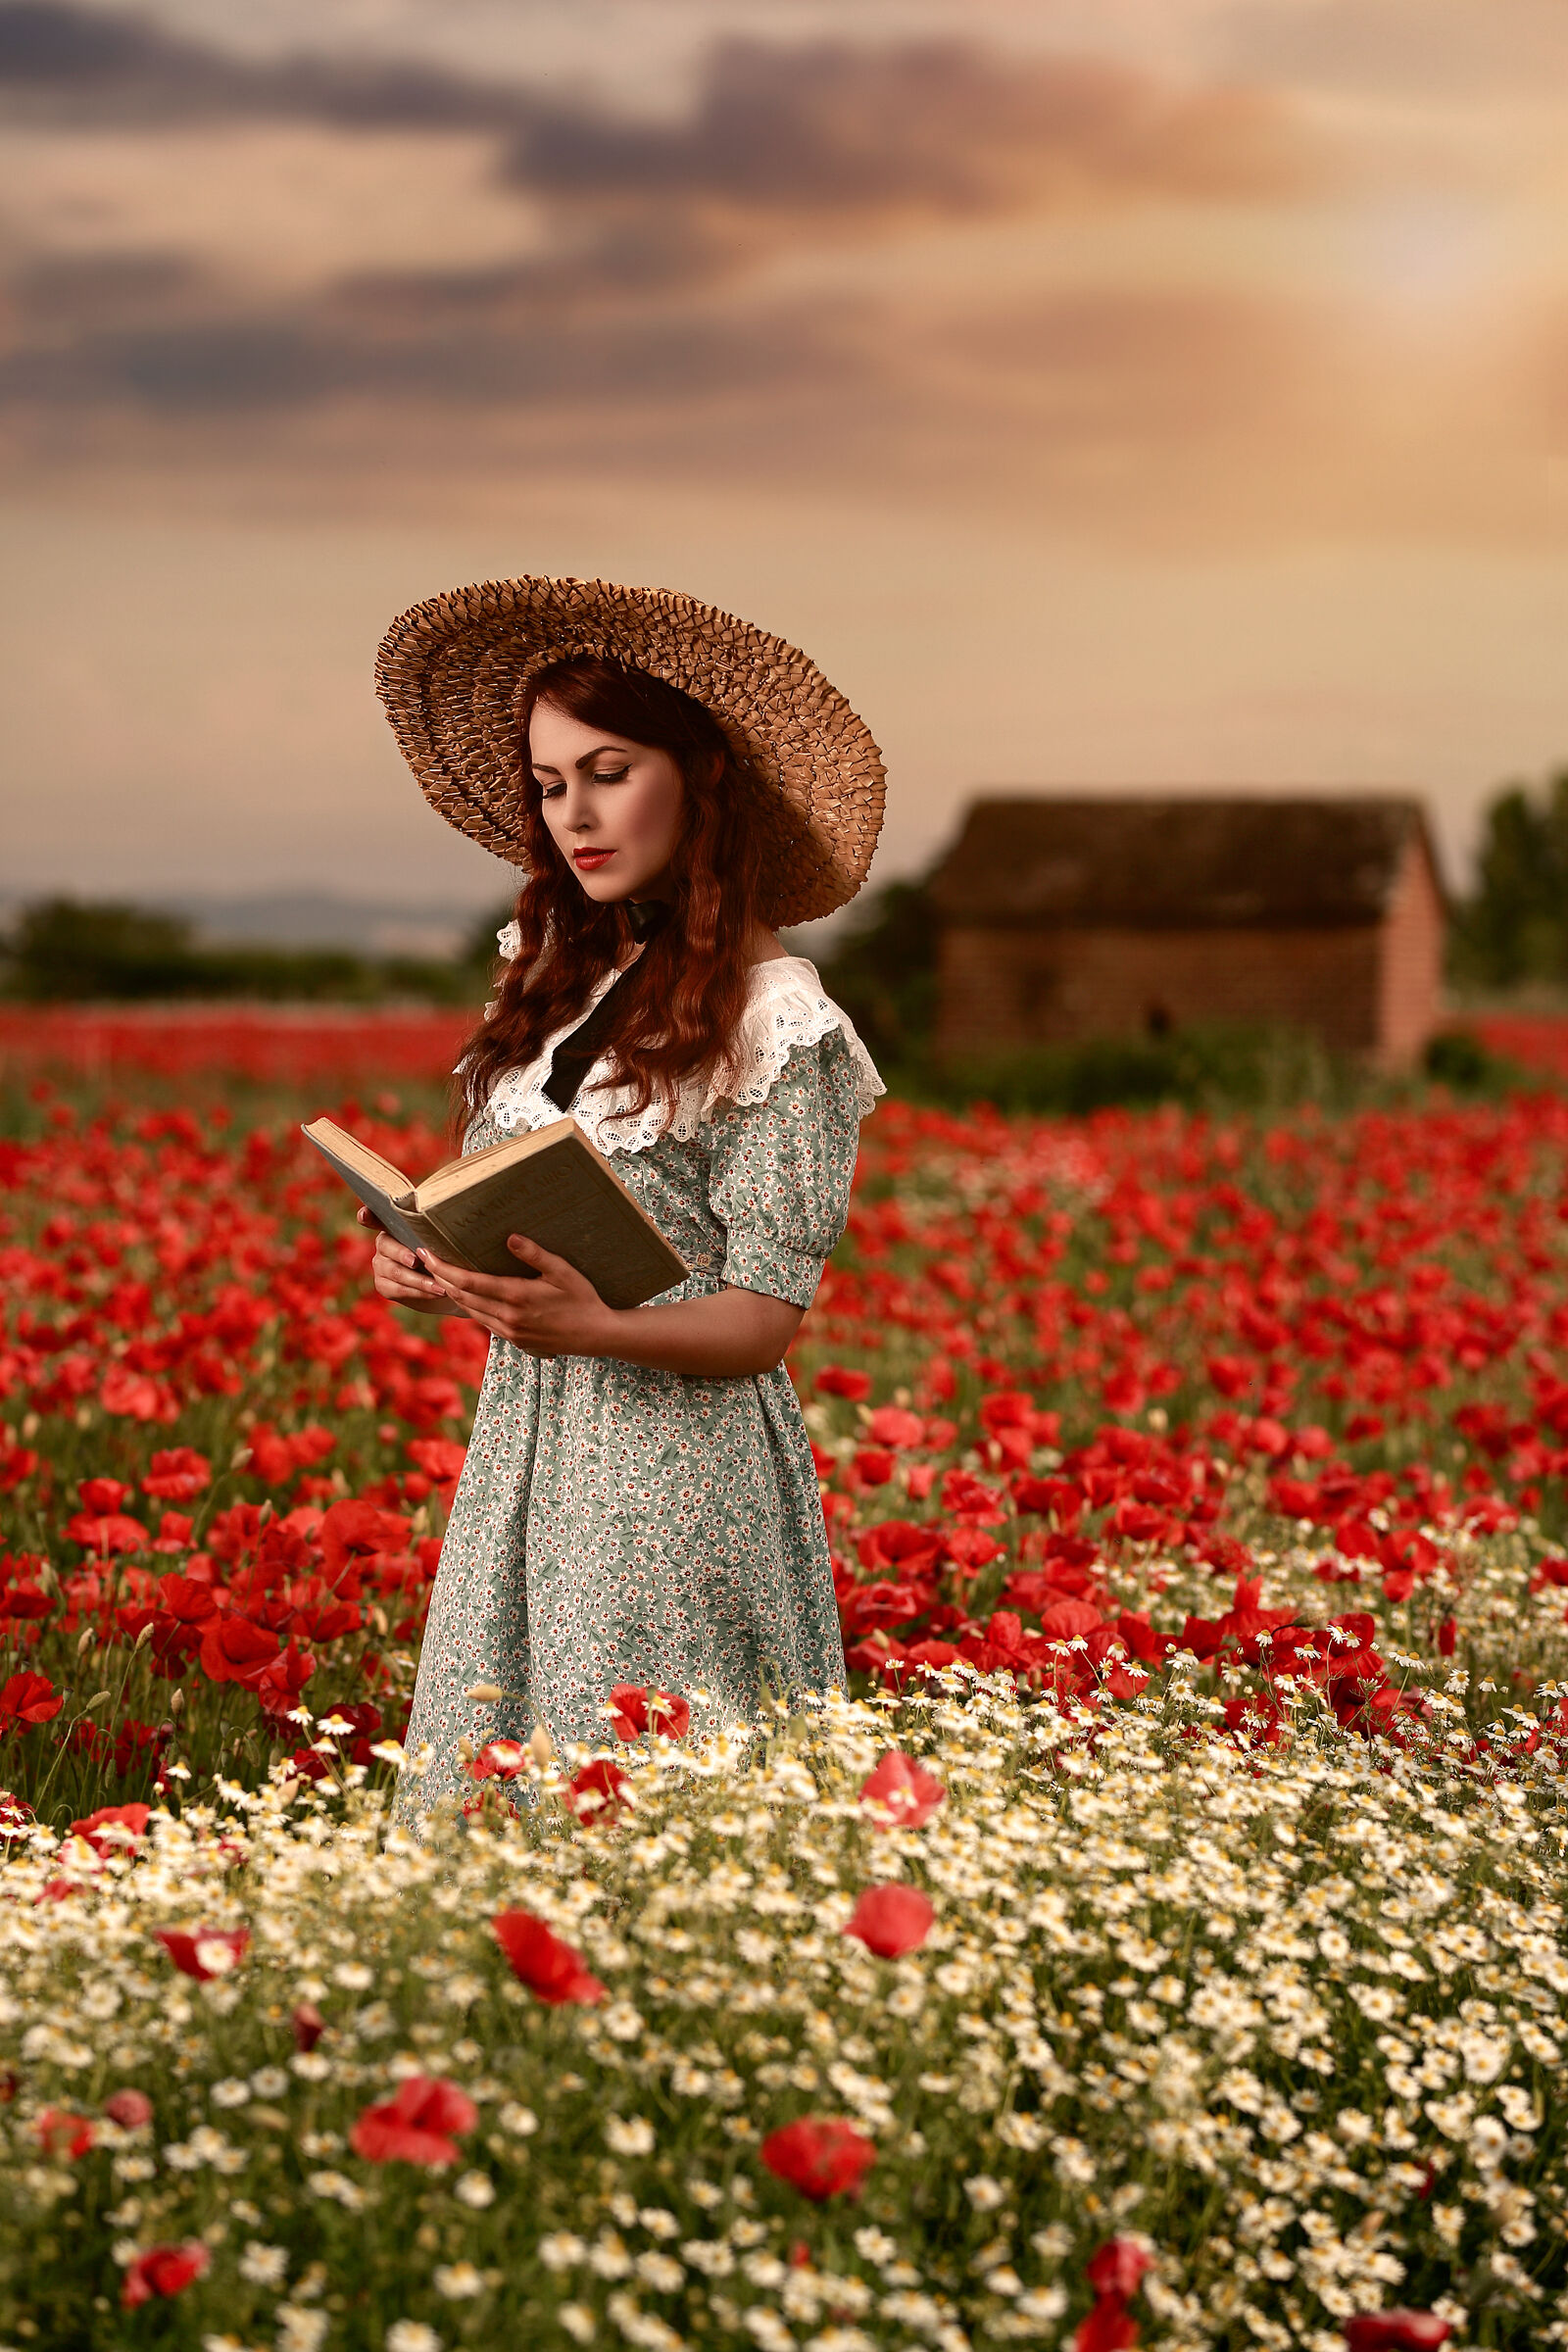 Reading among the poppies ...